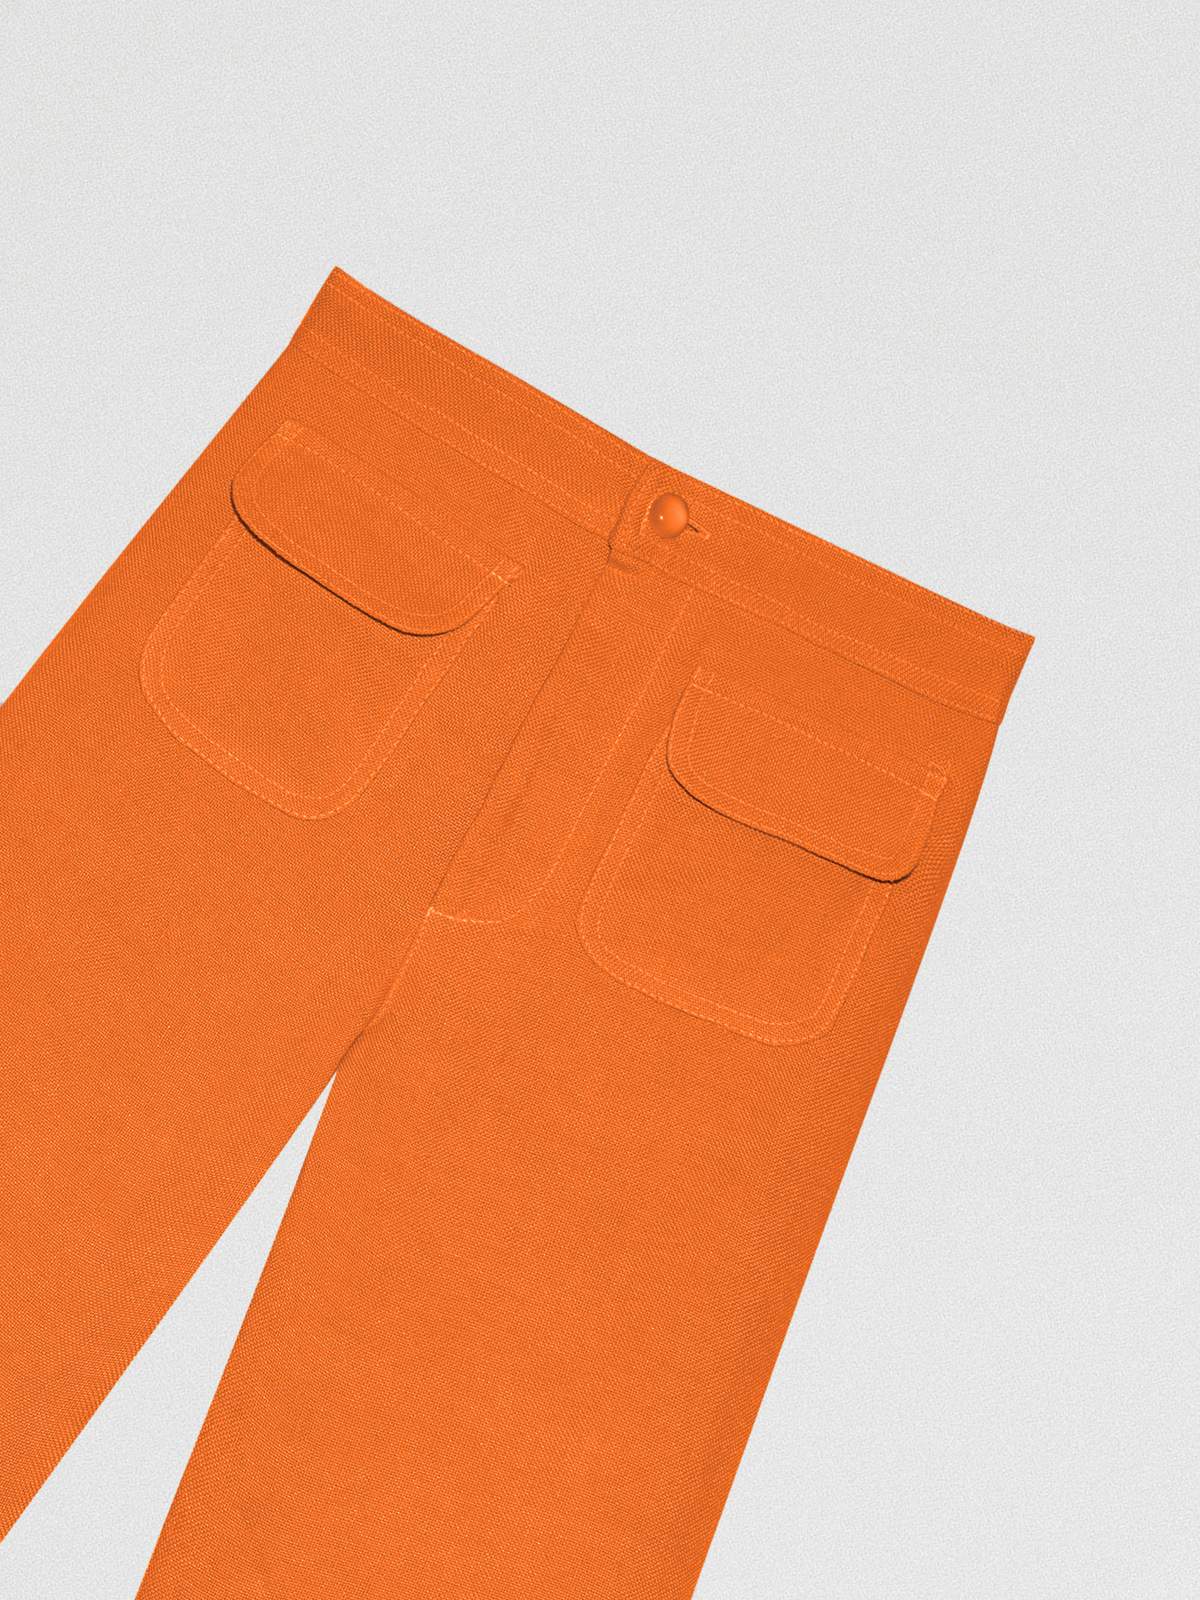 Orange high-waisted linen trousers with pockets. 